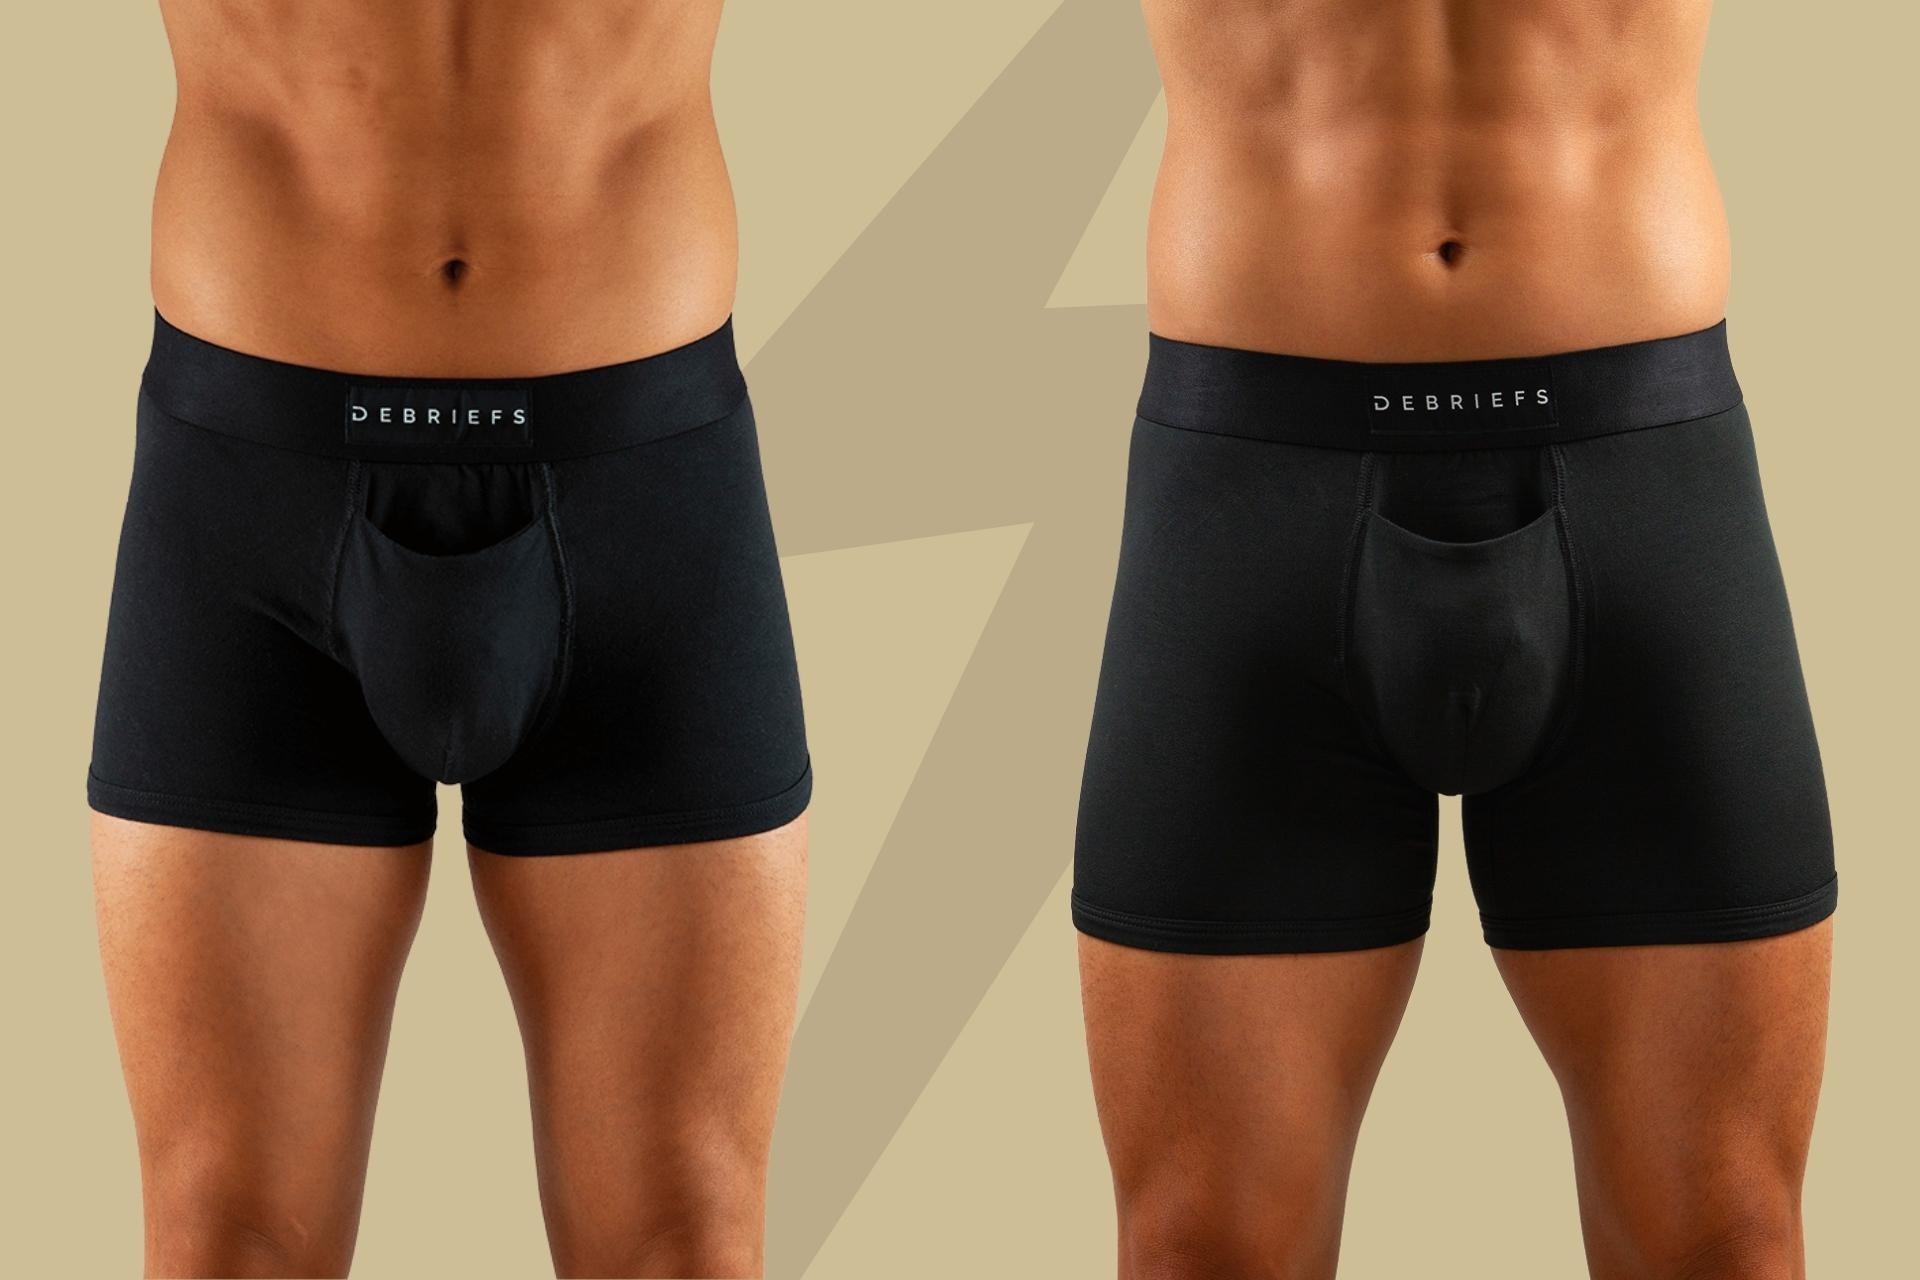 Trunks or Boxer Briefs: What's the Difference? | The Brief